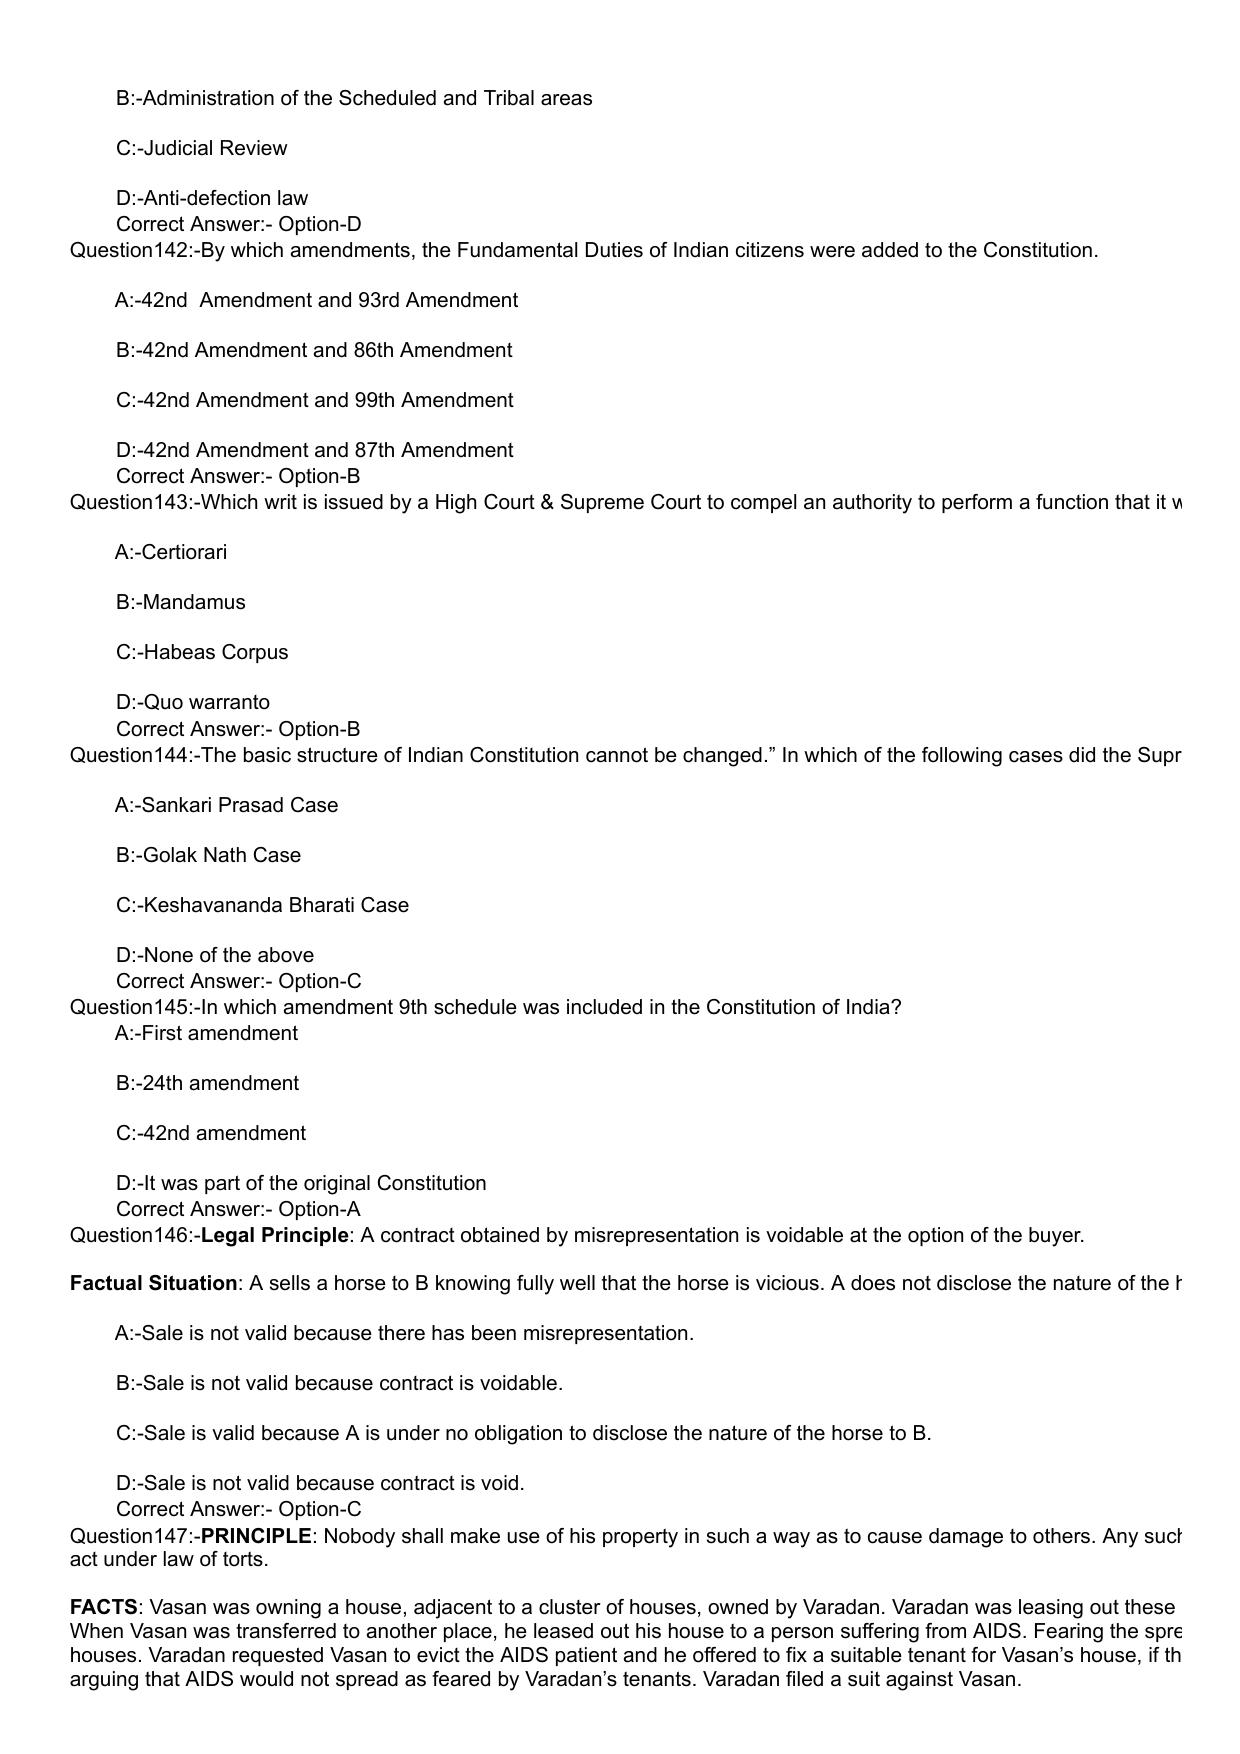 KLEE 5 Year LLB Exam 2020 Question Paper - Page 25